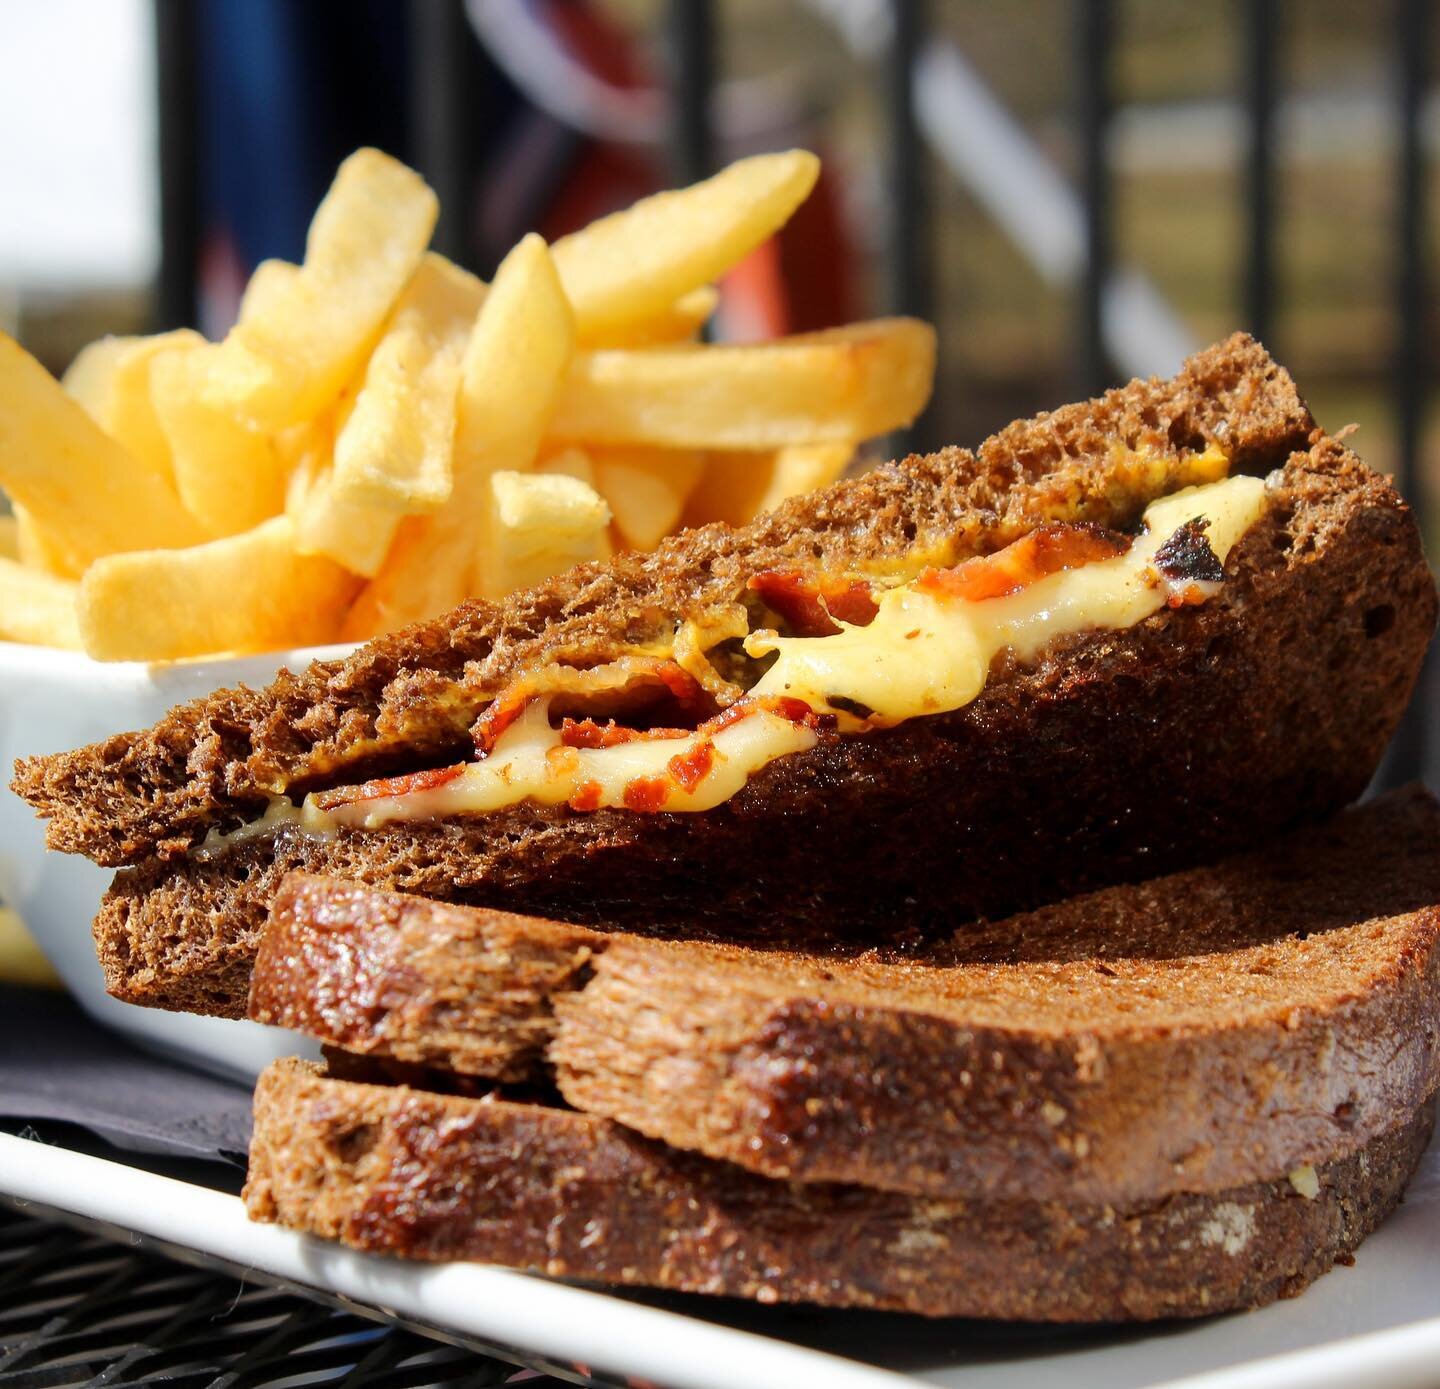 🚨March Grilled Cheese of the Month:🚨
Dubliner Aged Cheese, Thick Cut Bacon, and Strong Irish Mustard on Traditional Brown Bread